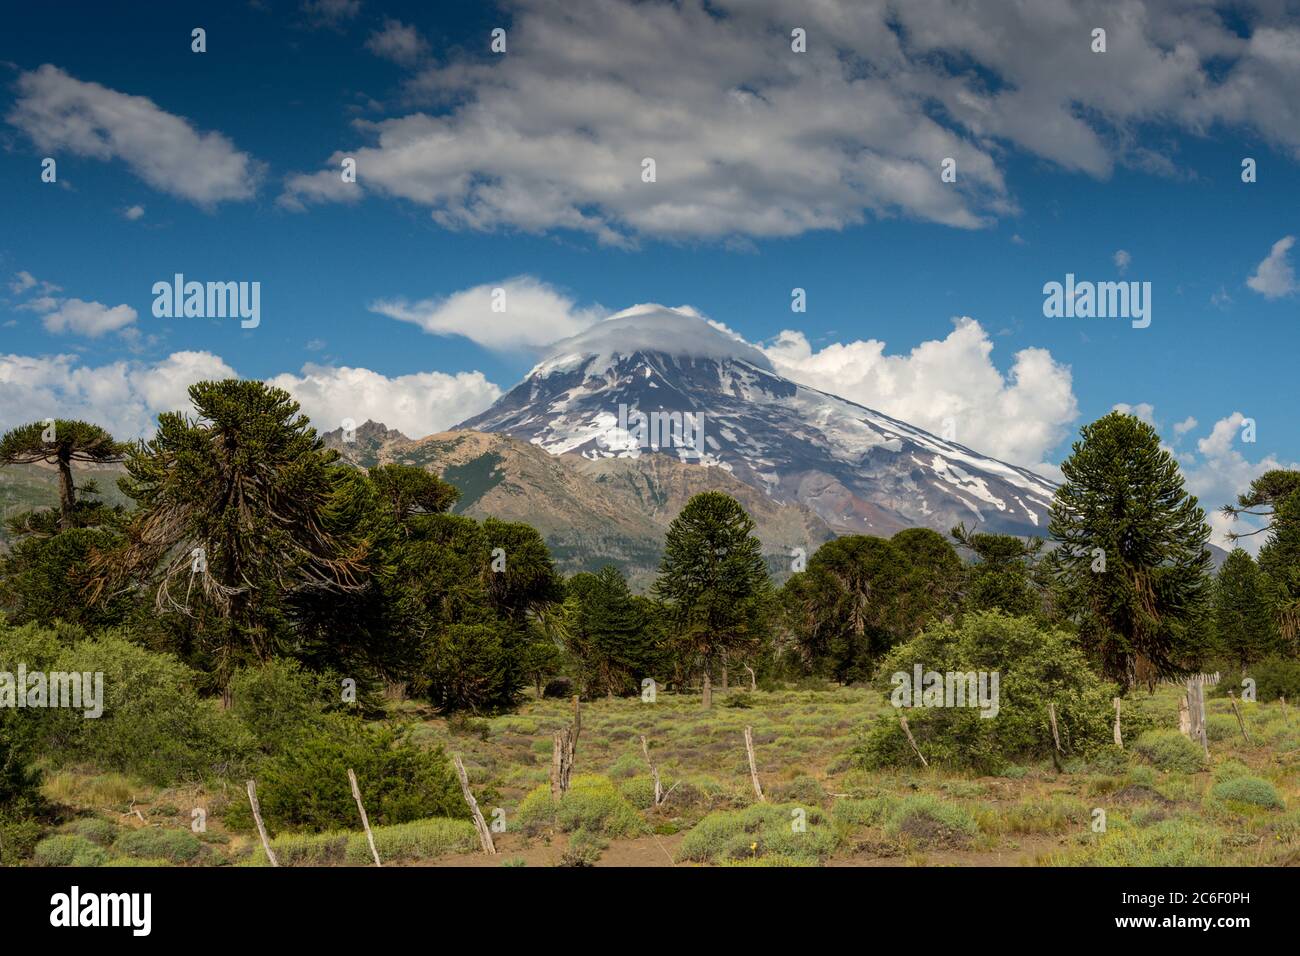 View of Volcan Lanin from Ruta 60 in the Argentinian Andes Stock Photo